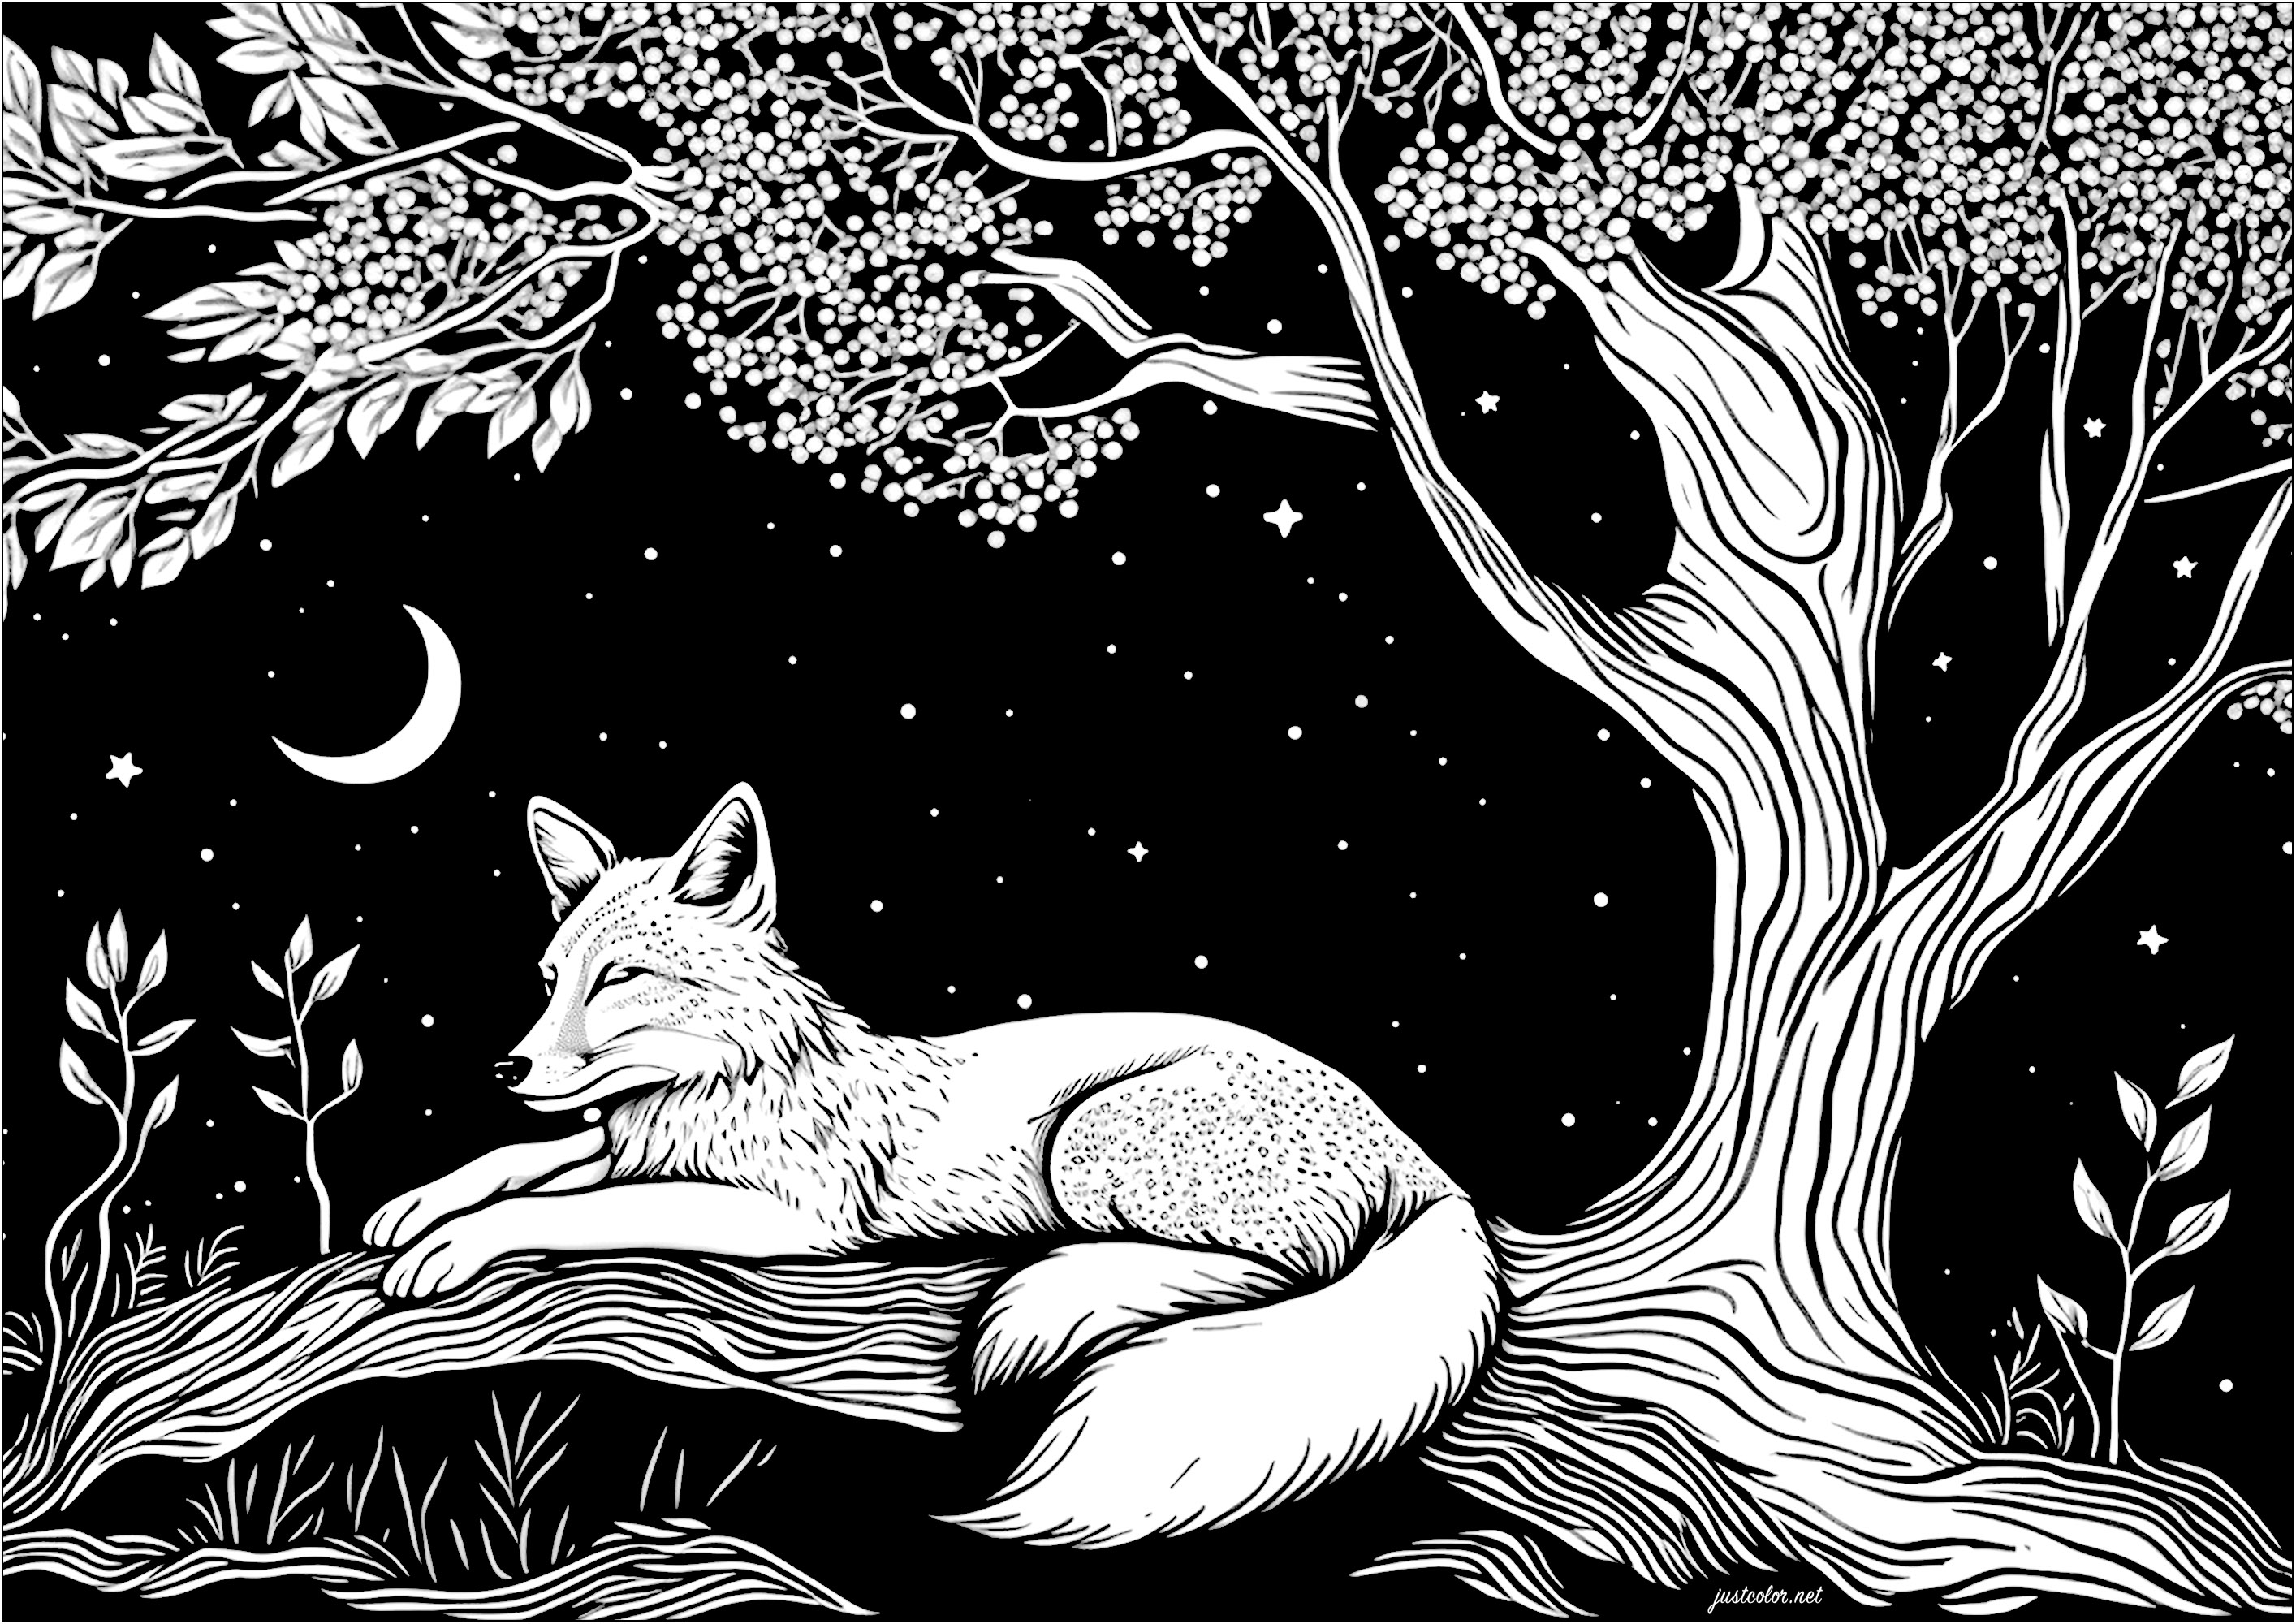 Coloring of a fox sleeping in the moonlight. It is a clear, calm night, and a peaceful fox is asleep under a tree and the stars. He is surrounded by a starry sky and a quarter moon.